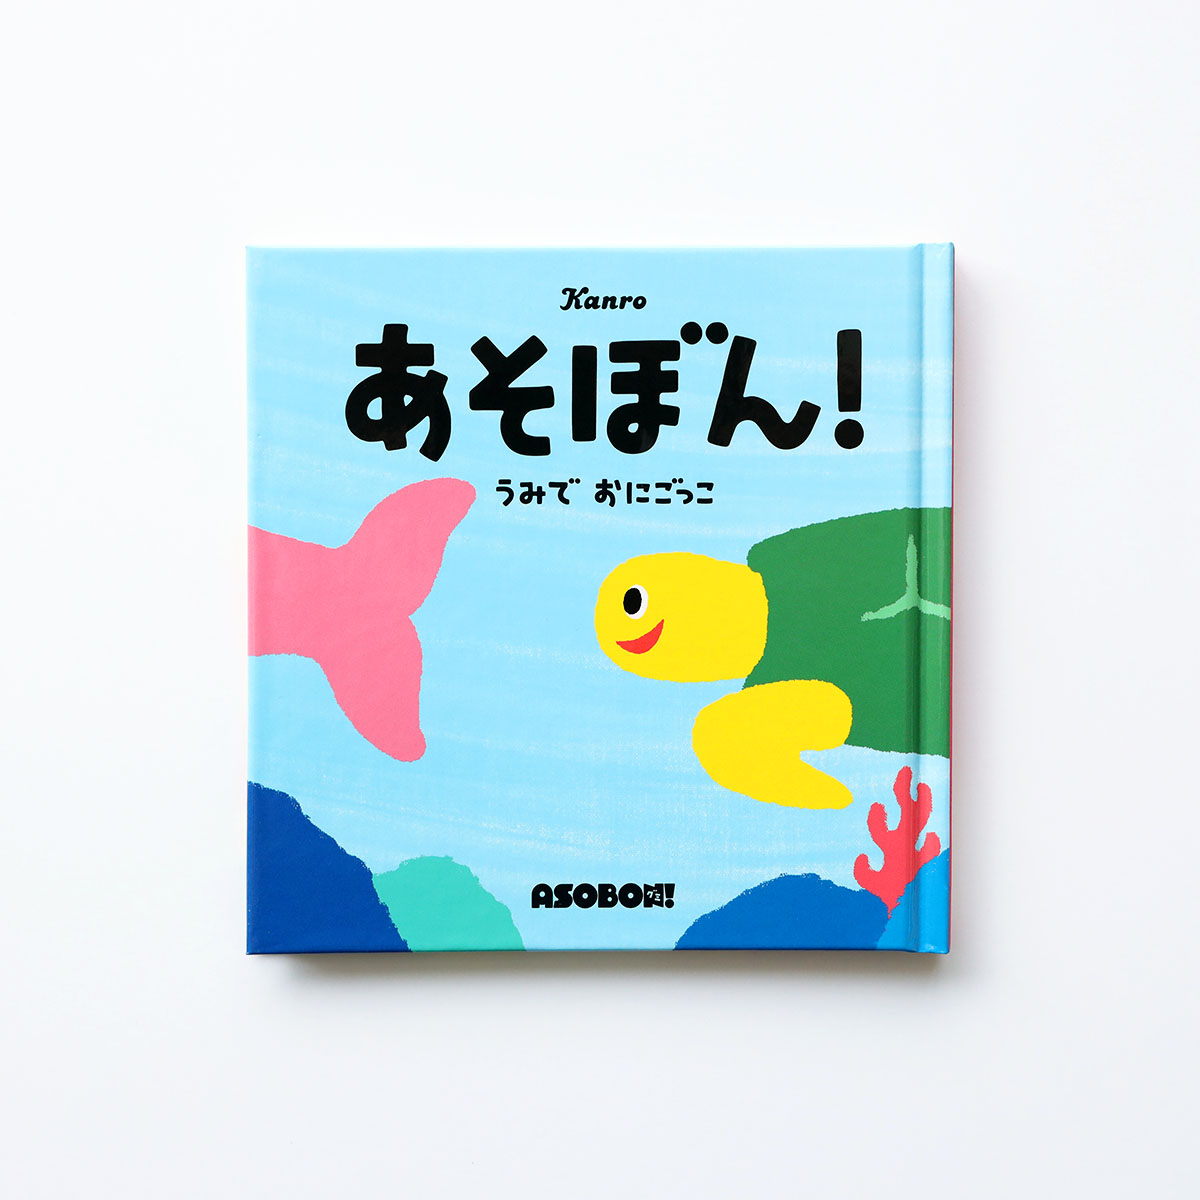 ASOBON! PICTURE BOOK